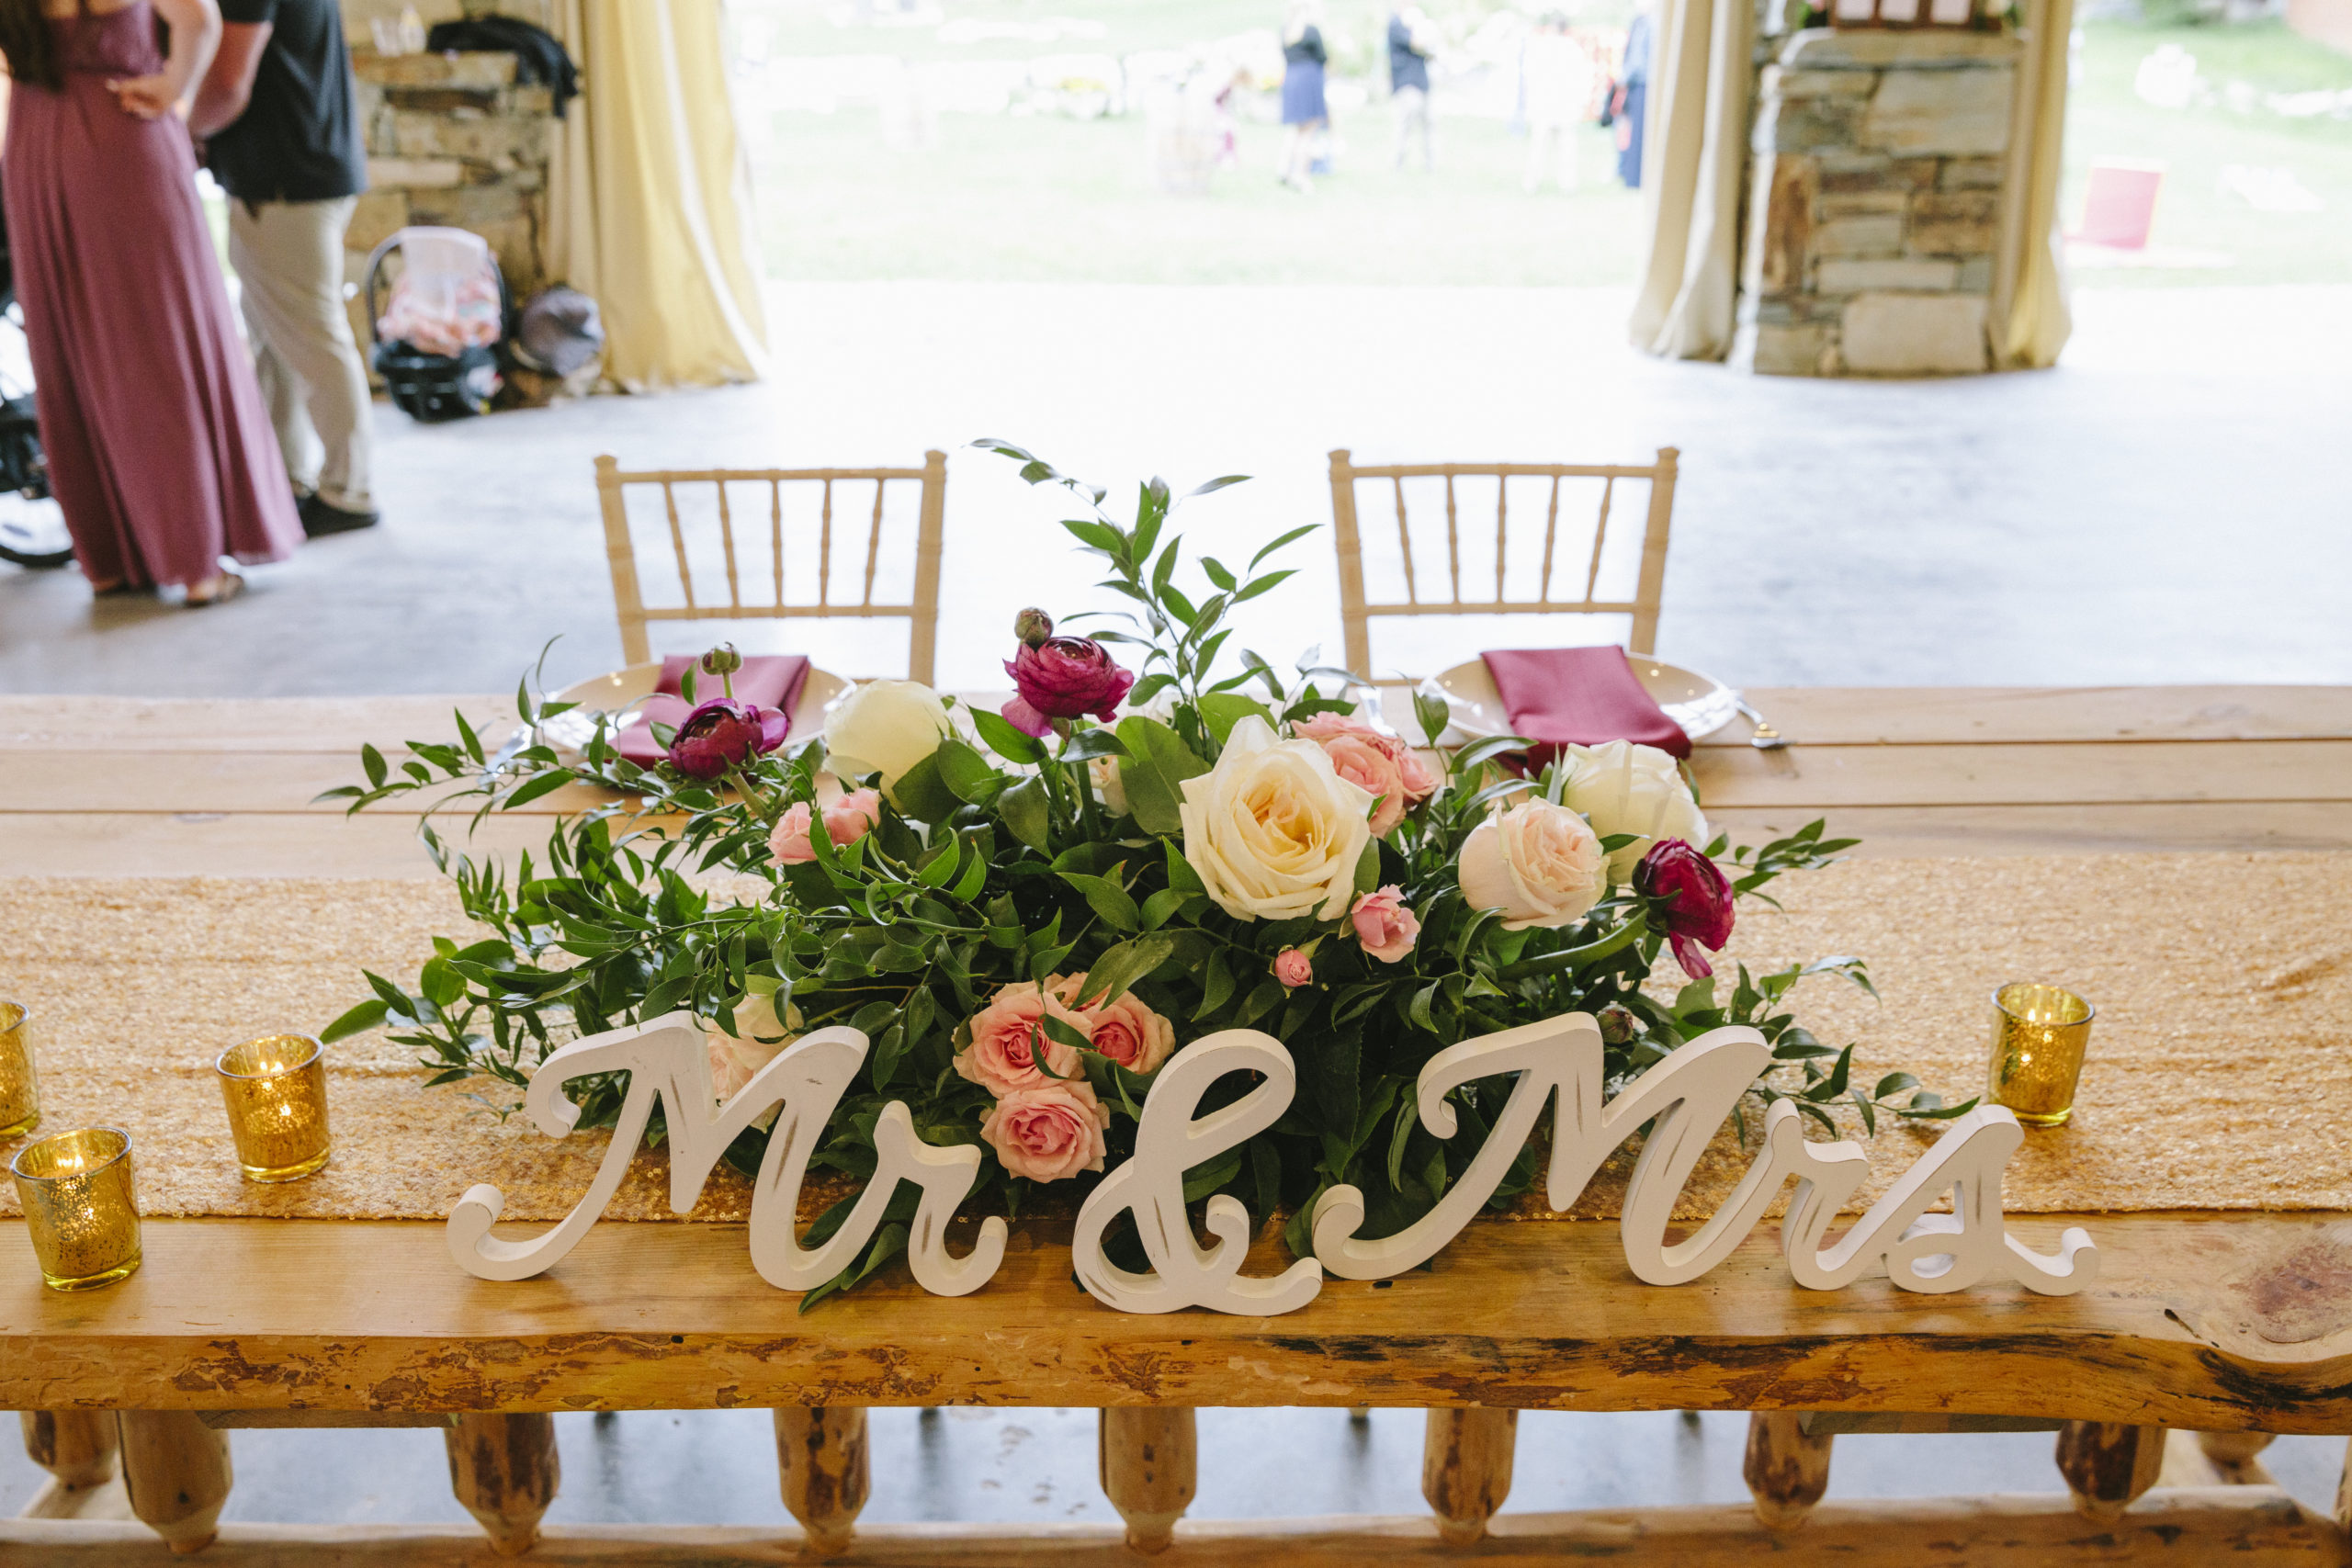 Sweetheart table at a ranch wedding reception